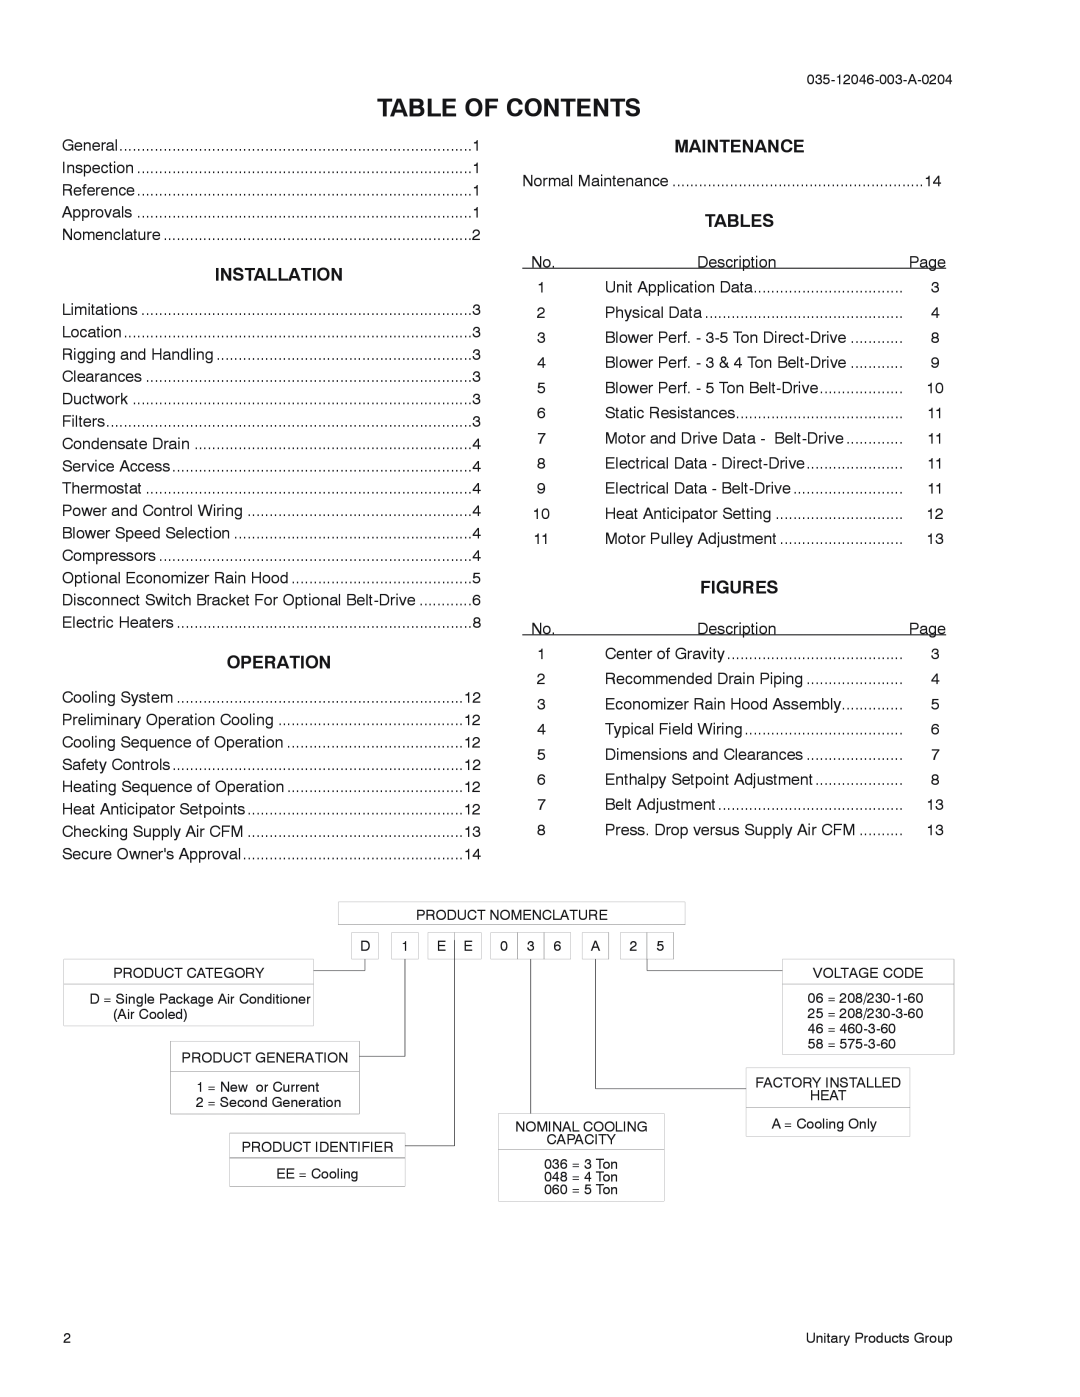 York D2EE 036, D1EE 048, D1EE 060 Table Of Contents, Maintenance, Tables, Installation, Figures, Operation 